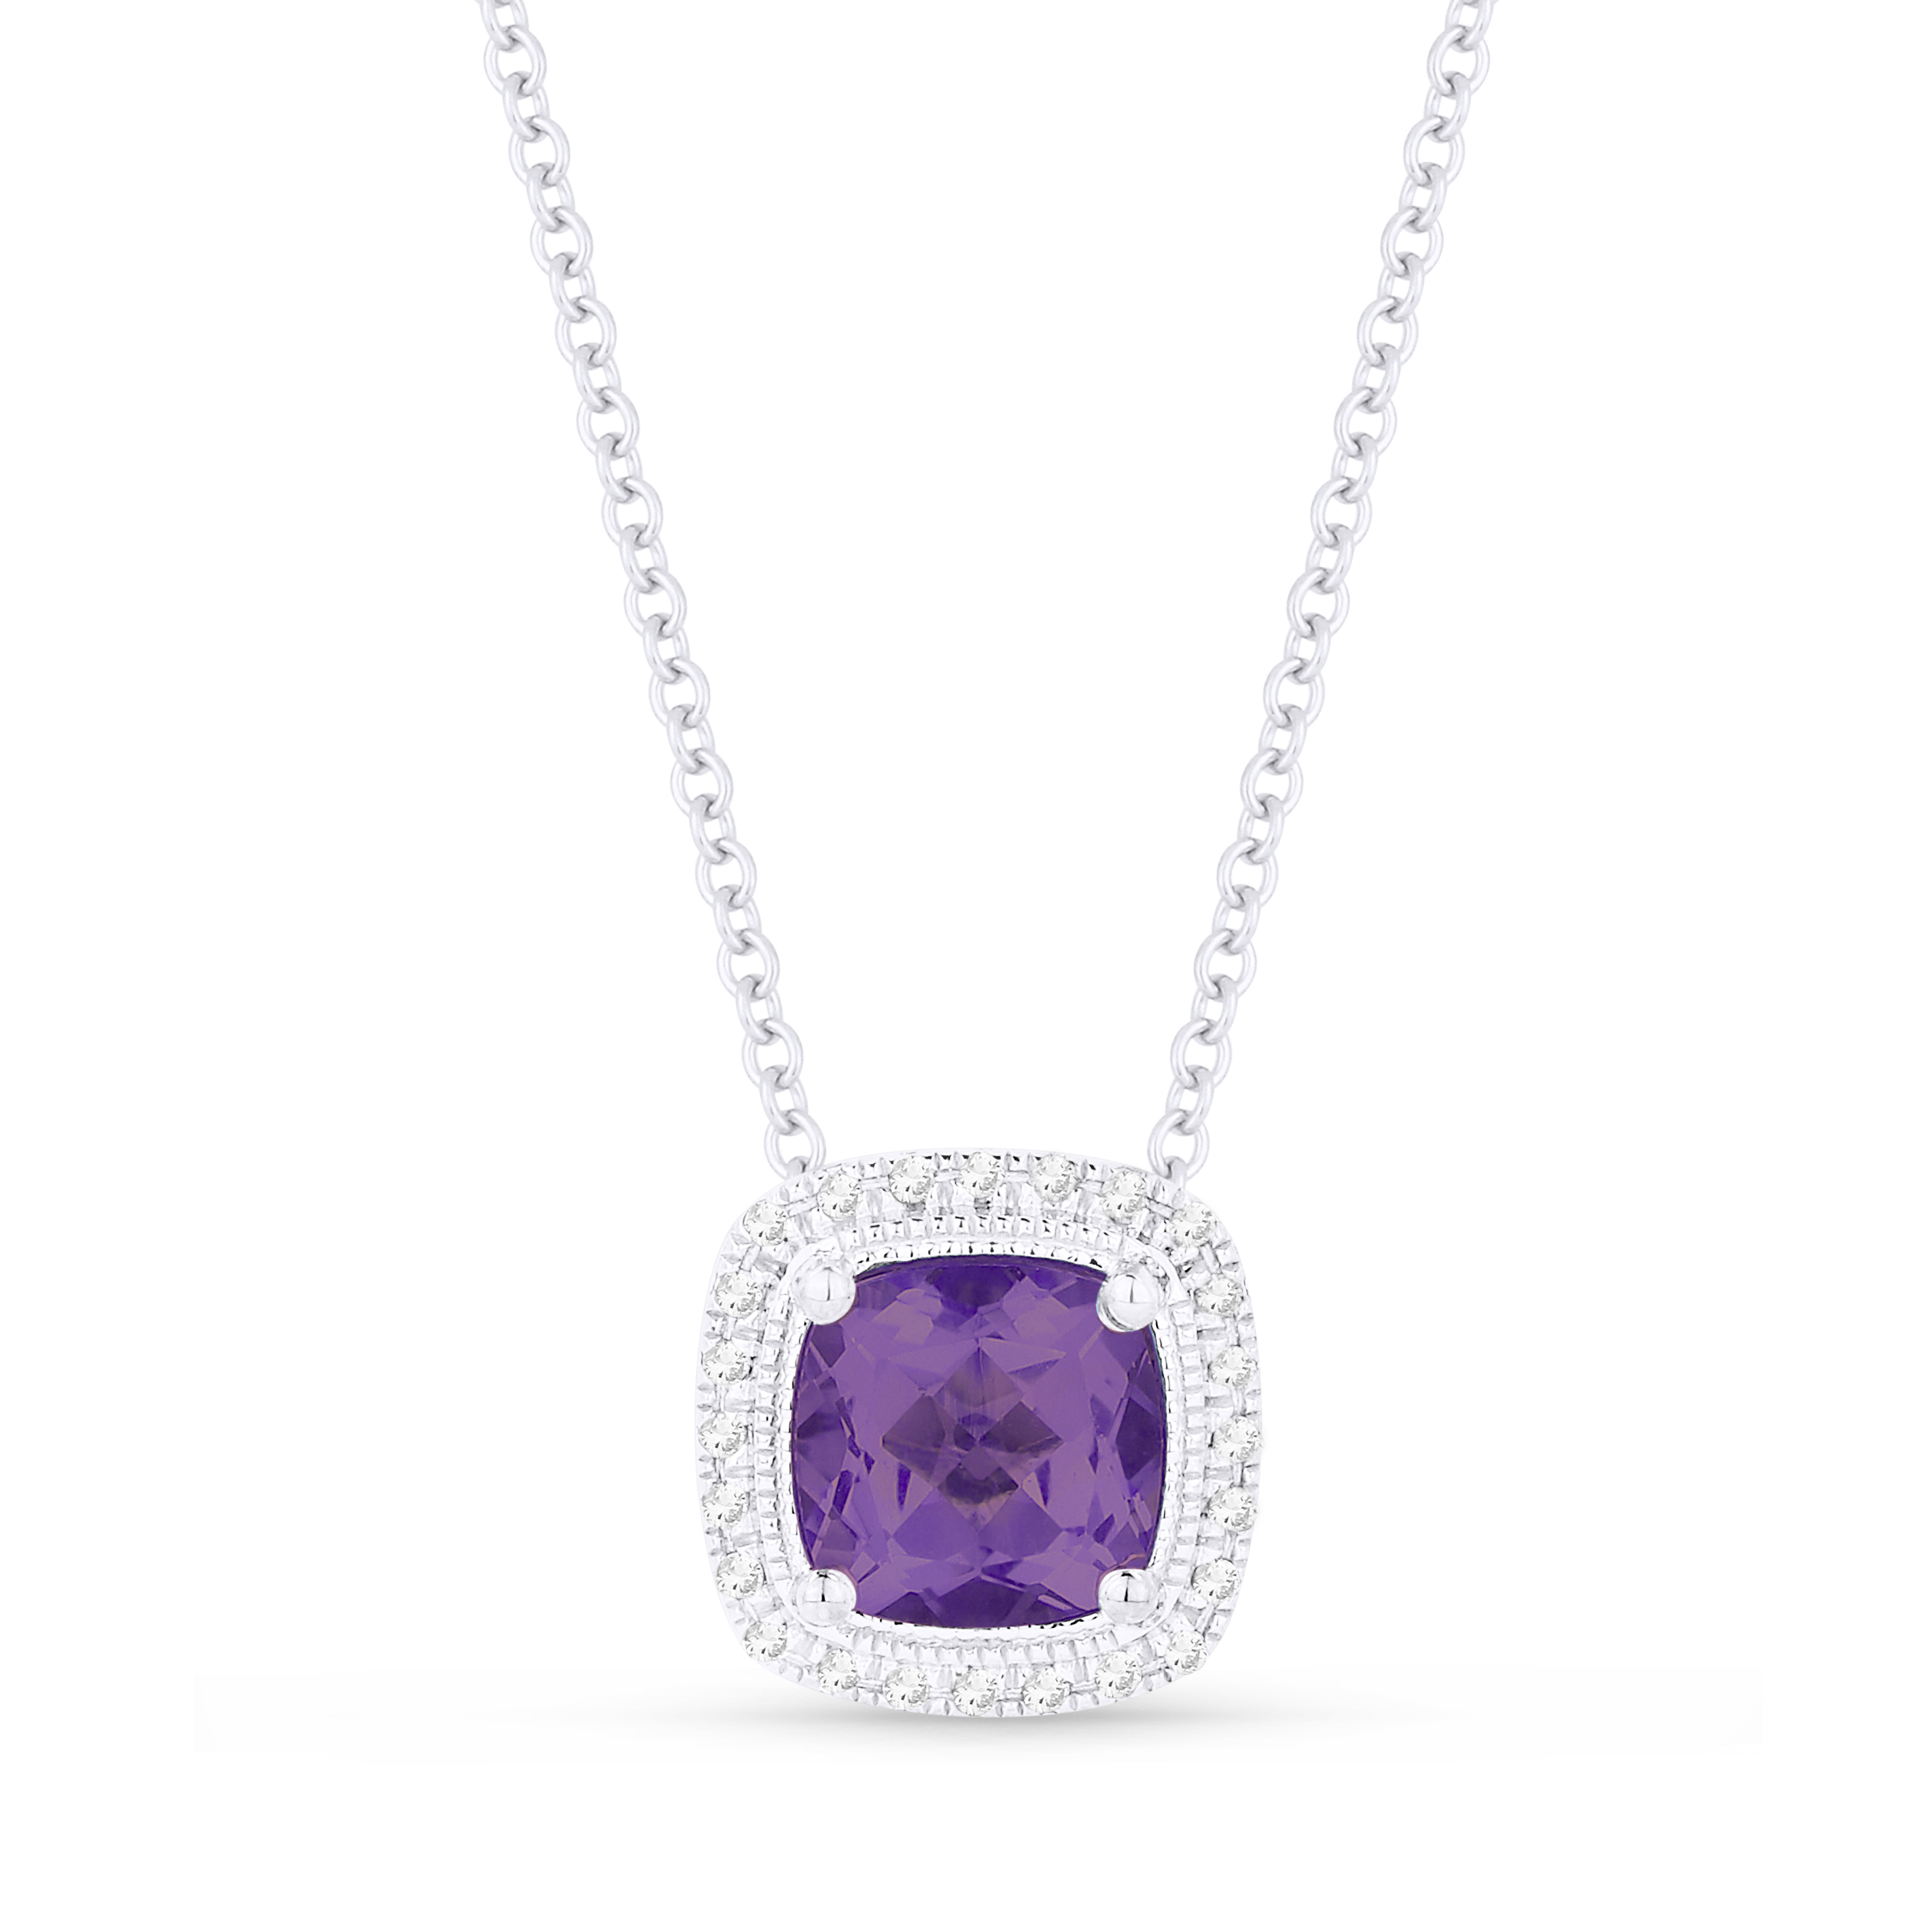 Lady's White 14 Karat Pendant/Chain With 24=0.06Tw Round Diamonds And One 0.59Ct Cushion Amethyst